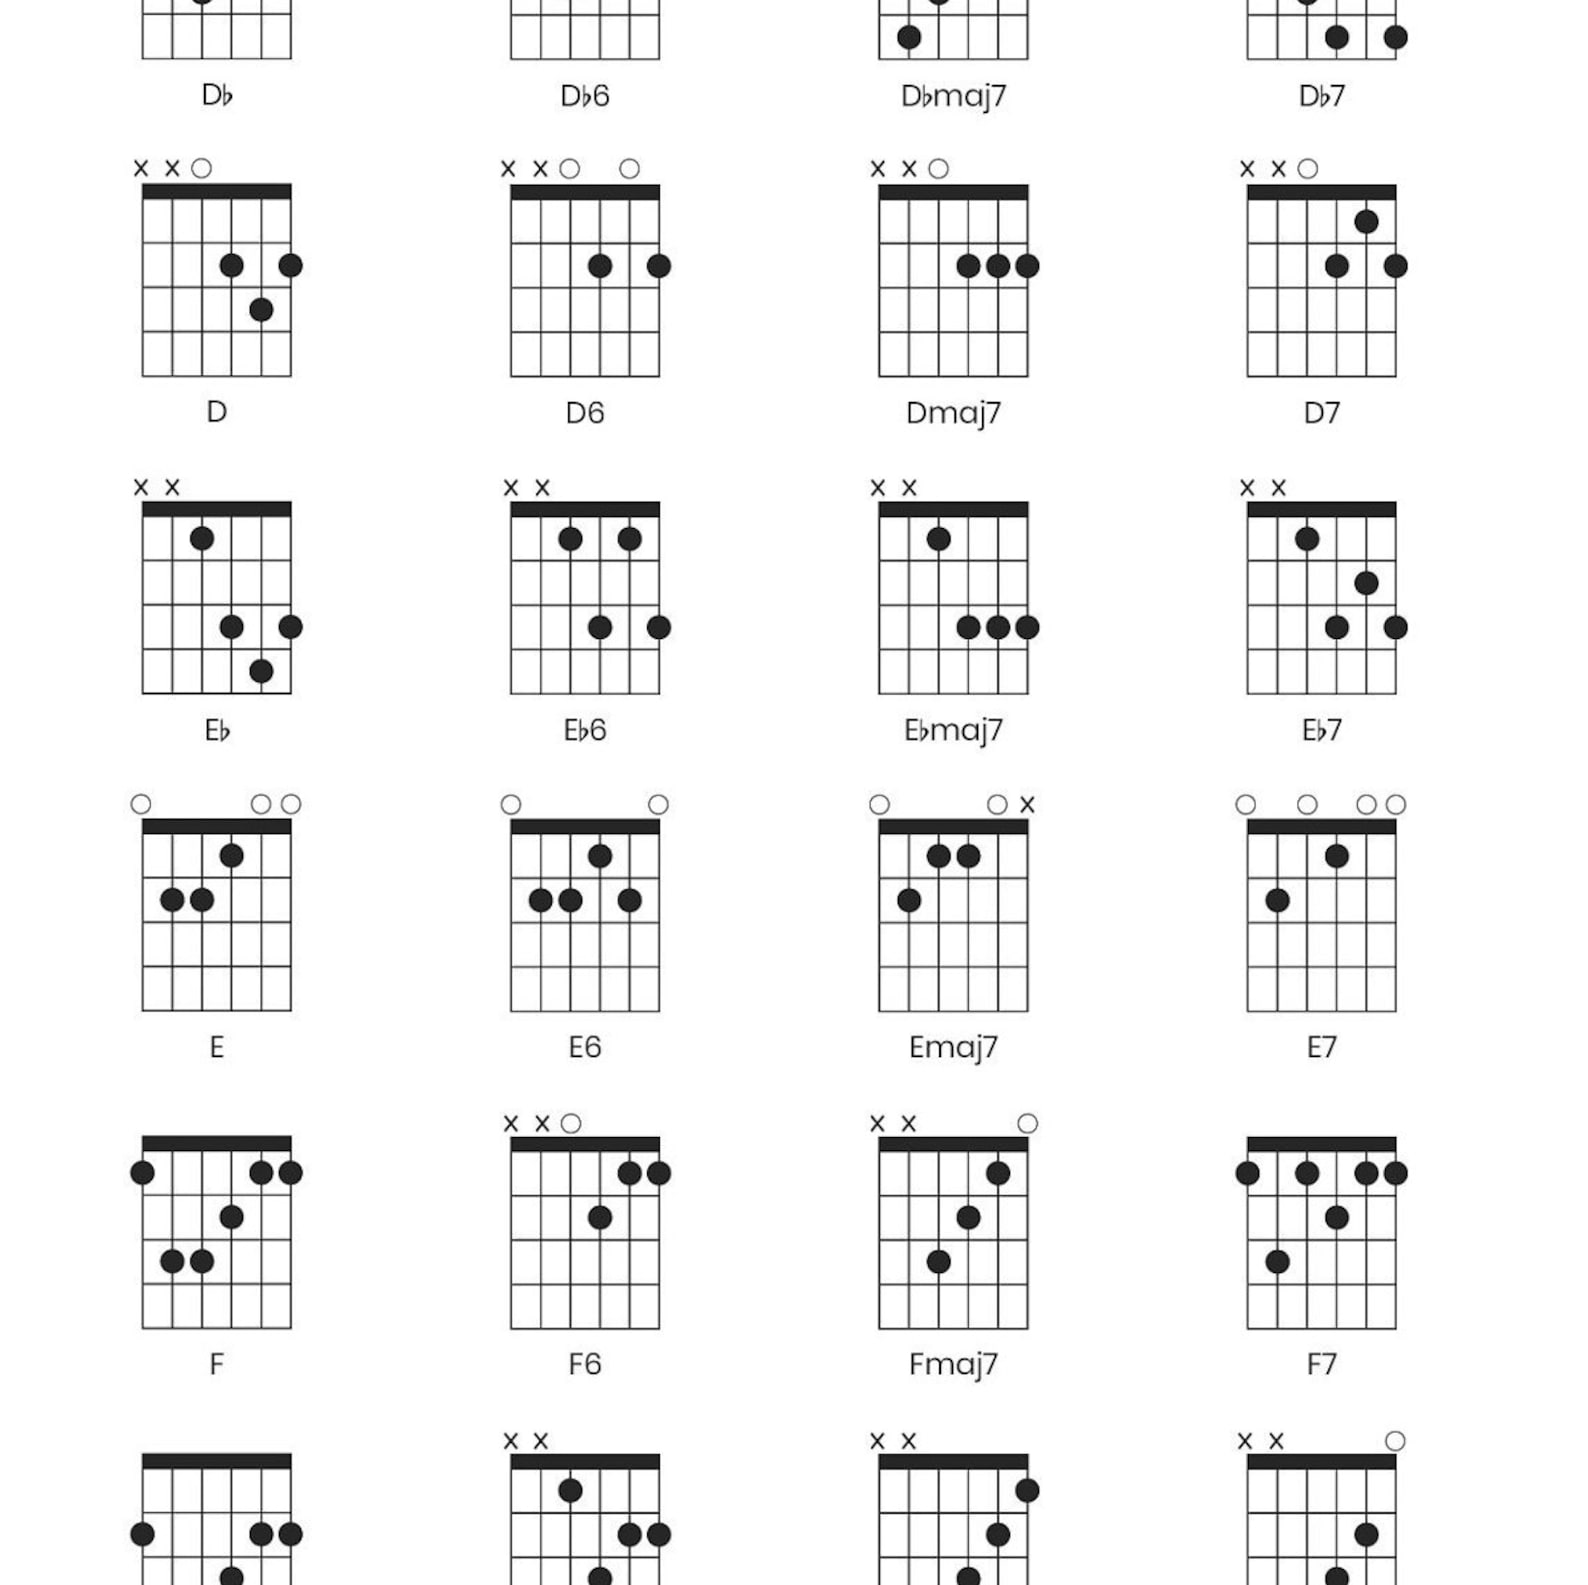 Guitar Notes And Finger Chart